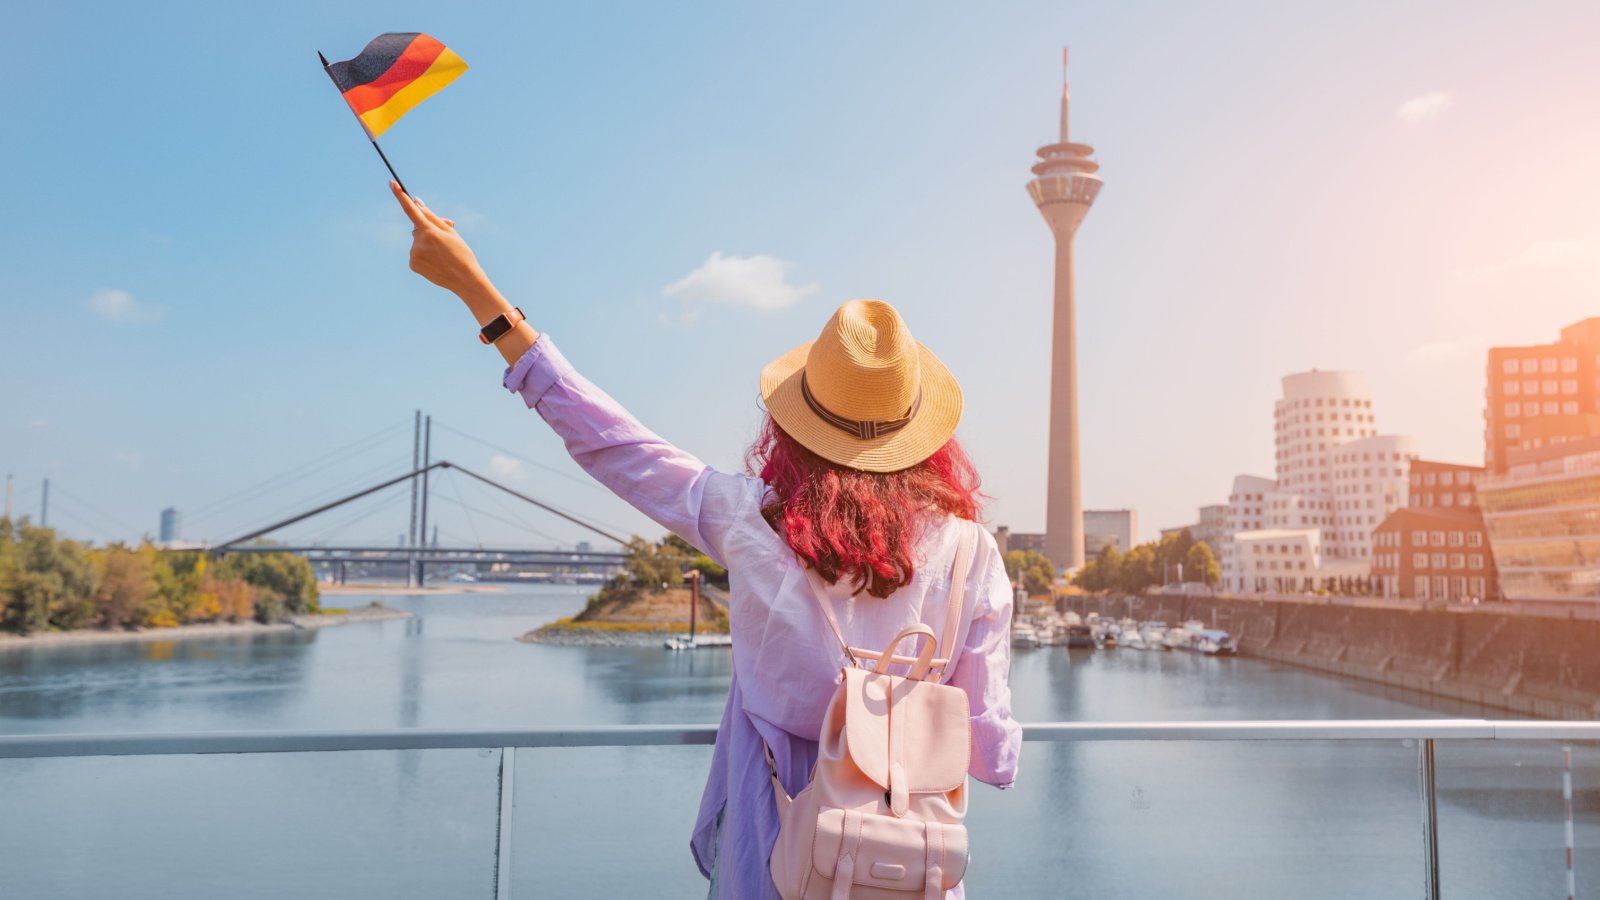 <p>Traveling to Germany doesn’t need to be expensive. Done the right way, you can save on your journey and make the most of your time there. I will show you how to do this and share some fantastic money-saving tips for your future trip to Germany. Here are 12 ways to save money exploring Germany the right way!</p>